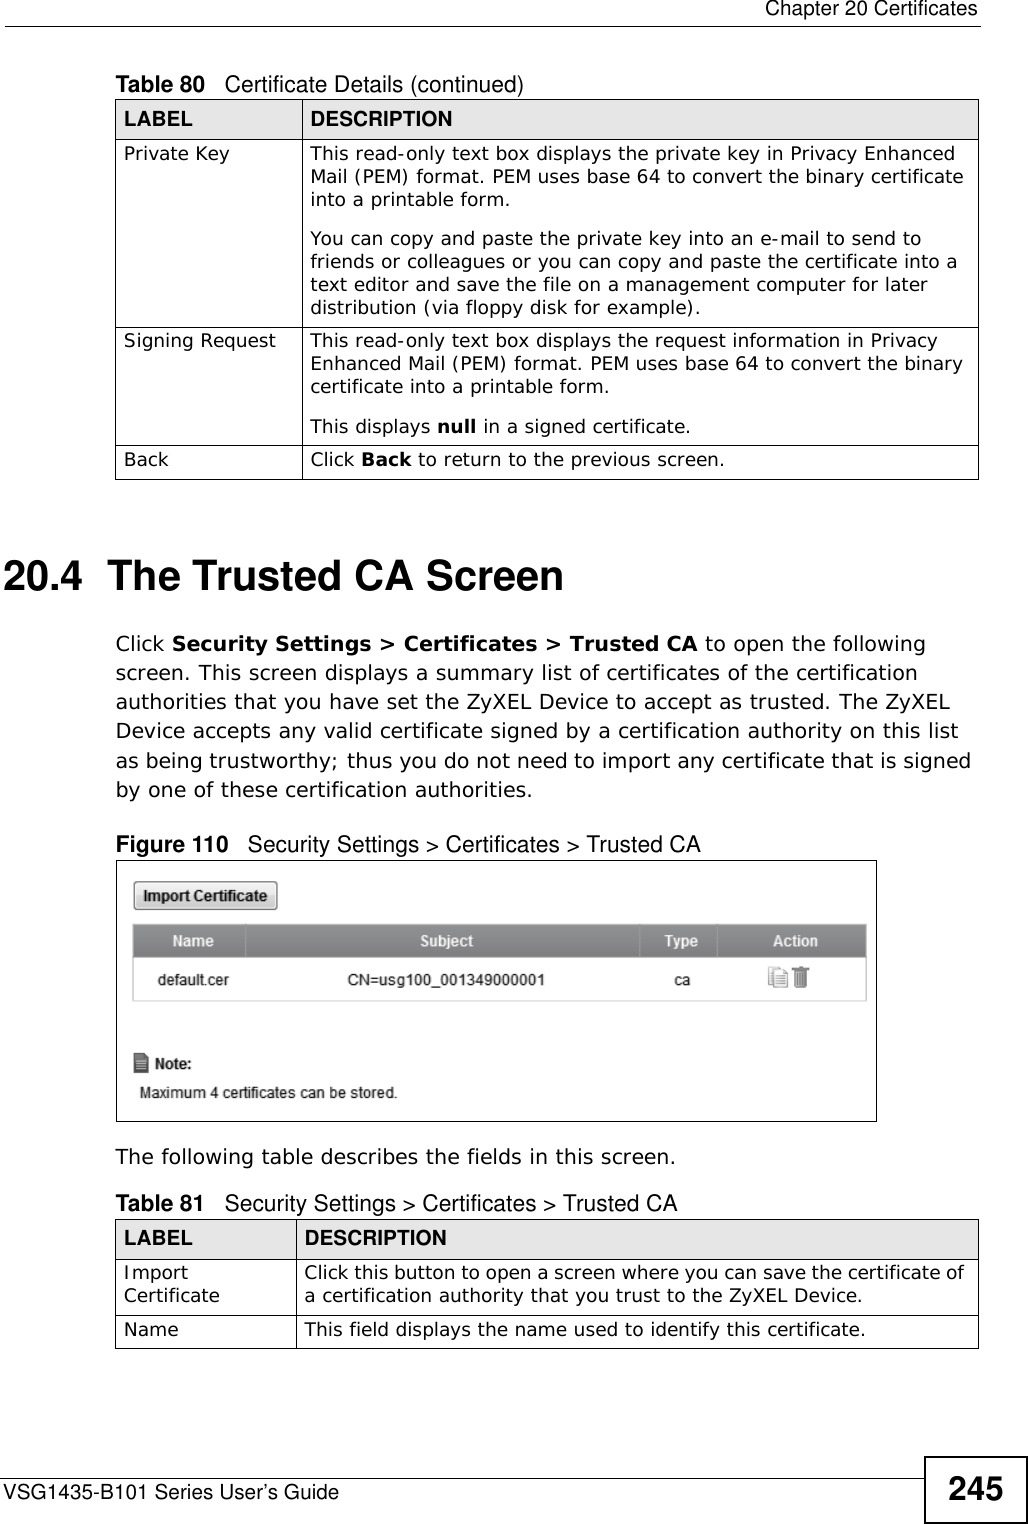  Chapter 20 CertificatesVSG1435-B101 Series User’s Guide 24520.4  The Trusted CA ScreenClick Security Settings &gt; Certificates &gt; Trusted CA to open the following screen. This screen displays a summary list of certificates of the certification authorities that you have set the ZyXEL Device to accept as trusted. The ZyXEL Device accepts any valid certificate signed by a certification authority on this list as being trustworthy; thus you do not need to import any certificate that is signed by one of these certification authorities. Figure 110   Security Settings &gt; Certificates &gt; Trusted CA The following table describes the fields in this screen. Private Key This read-only text box displays the private key in Privacy Enhanced Mail (PEM) format. PEM uses base 64 to convert the binary certificate into a printable form. You can copy and paste the private key into an e-mail to send to friends or colleagues or you can copy and paste the certificate into a text editor and save the file on a management computer for later distribution (via floppy disk for example).Signing Request This read-only text box displays the request information in Privacy Enhanced Mail (PEM) format. PEM uses base 64 to convert the binary certificate into a printable form. This displays null in a signed certificate.Back Click Back to return to the previous screen.Table 80   Certificate Details (continued)LABEL DESCRIPTIONTable 81   Security Settings &gt; Certificates &gt; Trusted CALABEL DESCRIPTIONImport Certificate Click this button to open a screen where you can save the certificate of a certification authority that you trust to the ZyXEL Device.Name This field displays the name used to identify this certificate. 